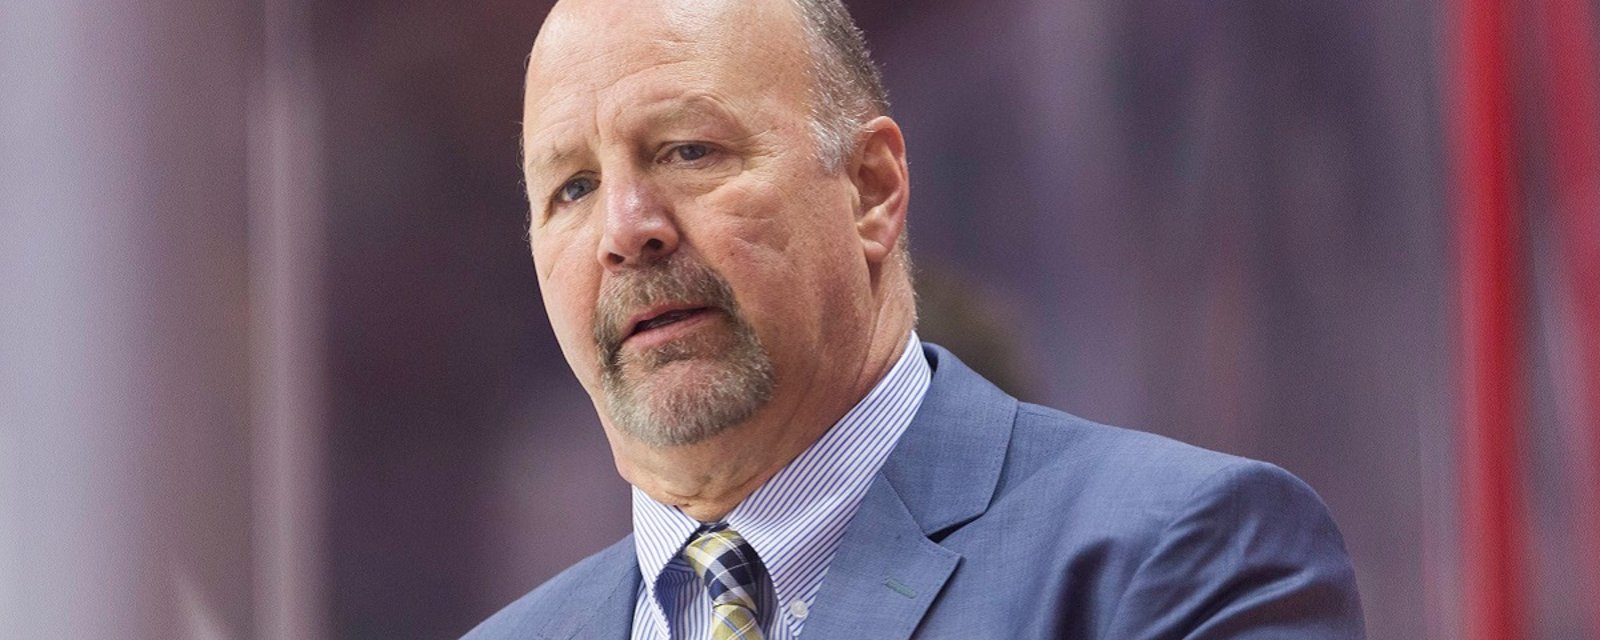 Claude Julien is reportedly now among the top 3 highest paid coaches in the NHL.